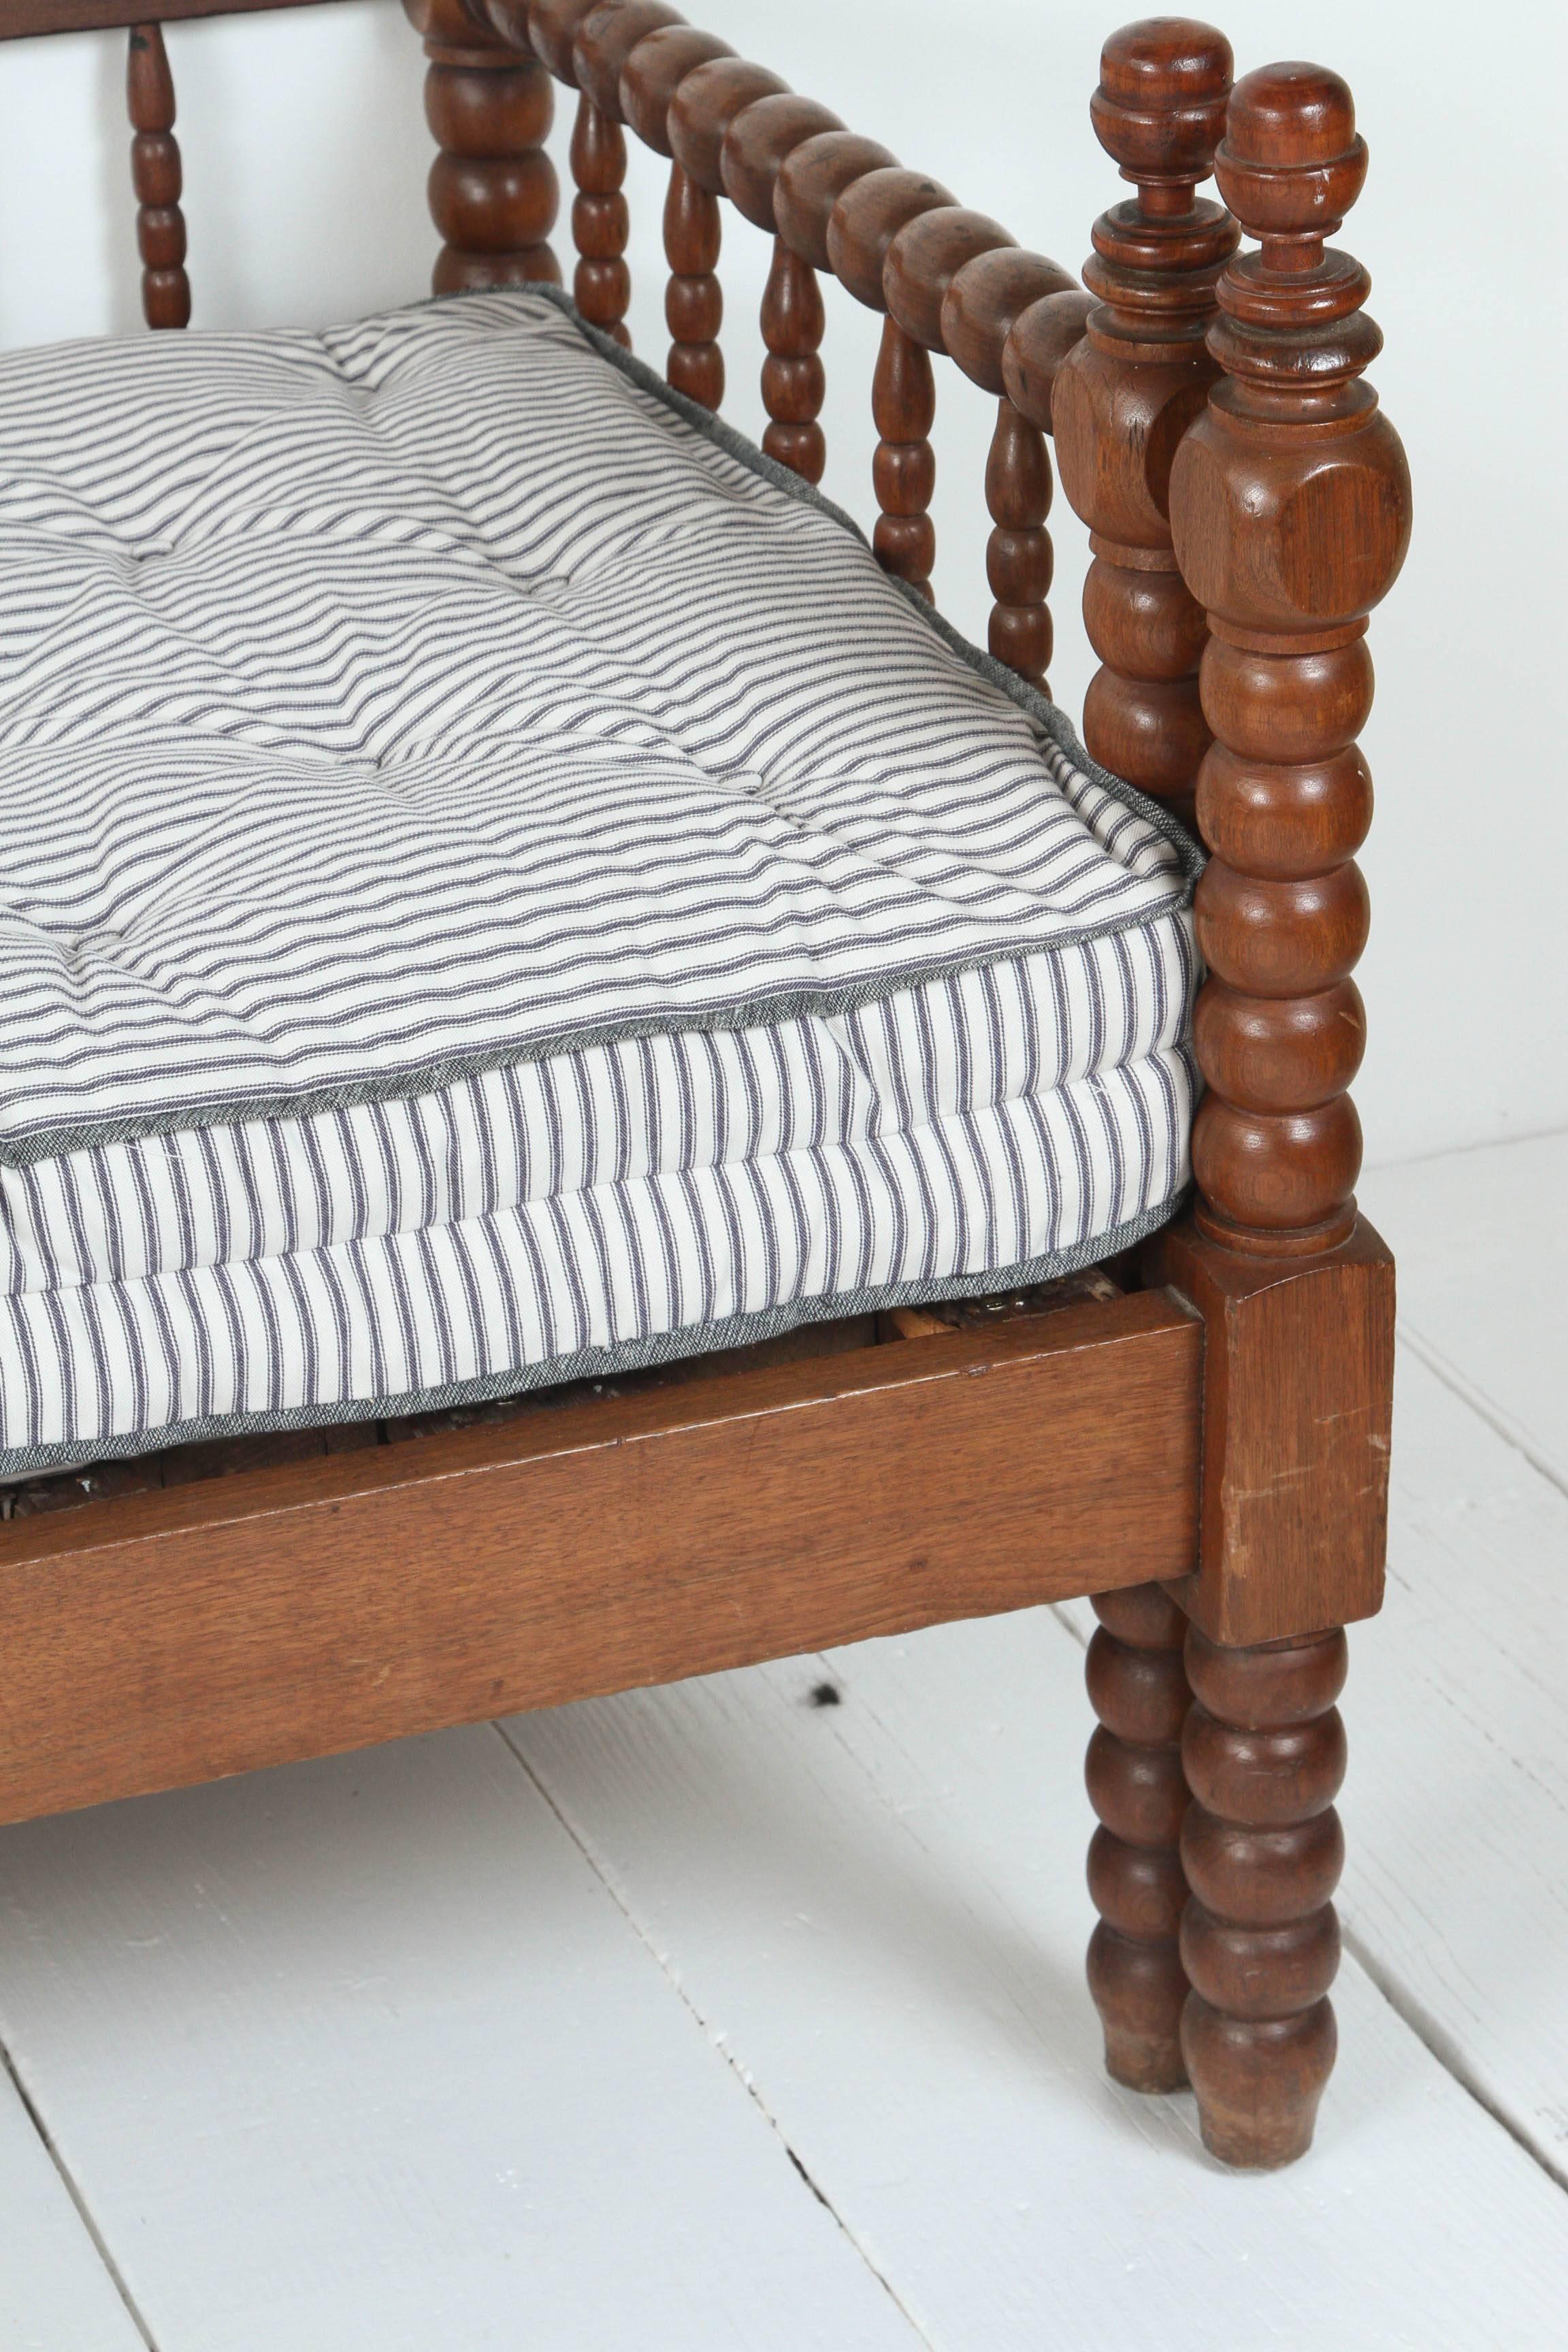 Vintage American spindle daybed with pull-out trundle with tufted striped mattress.